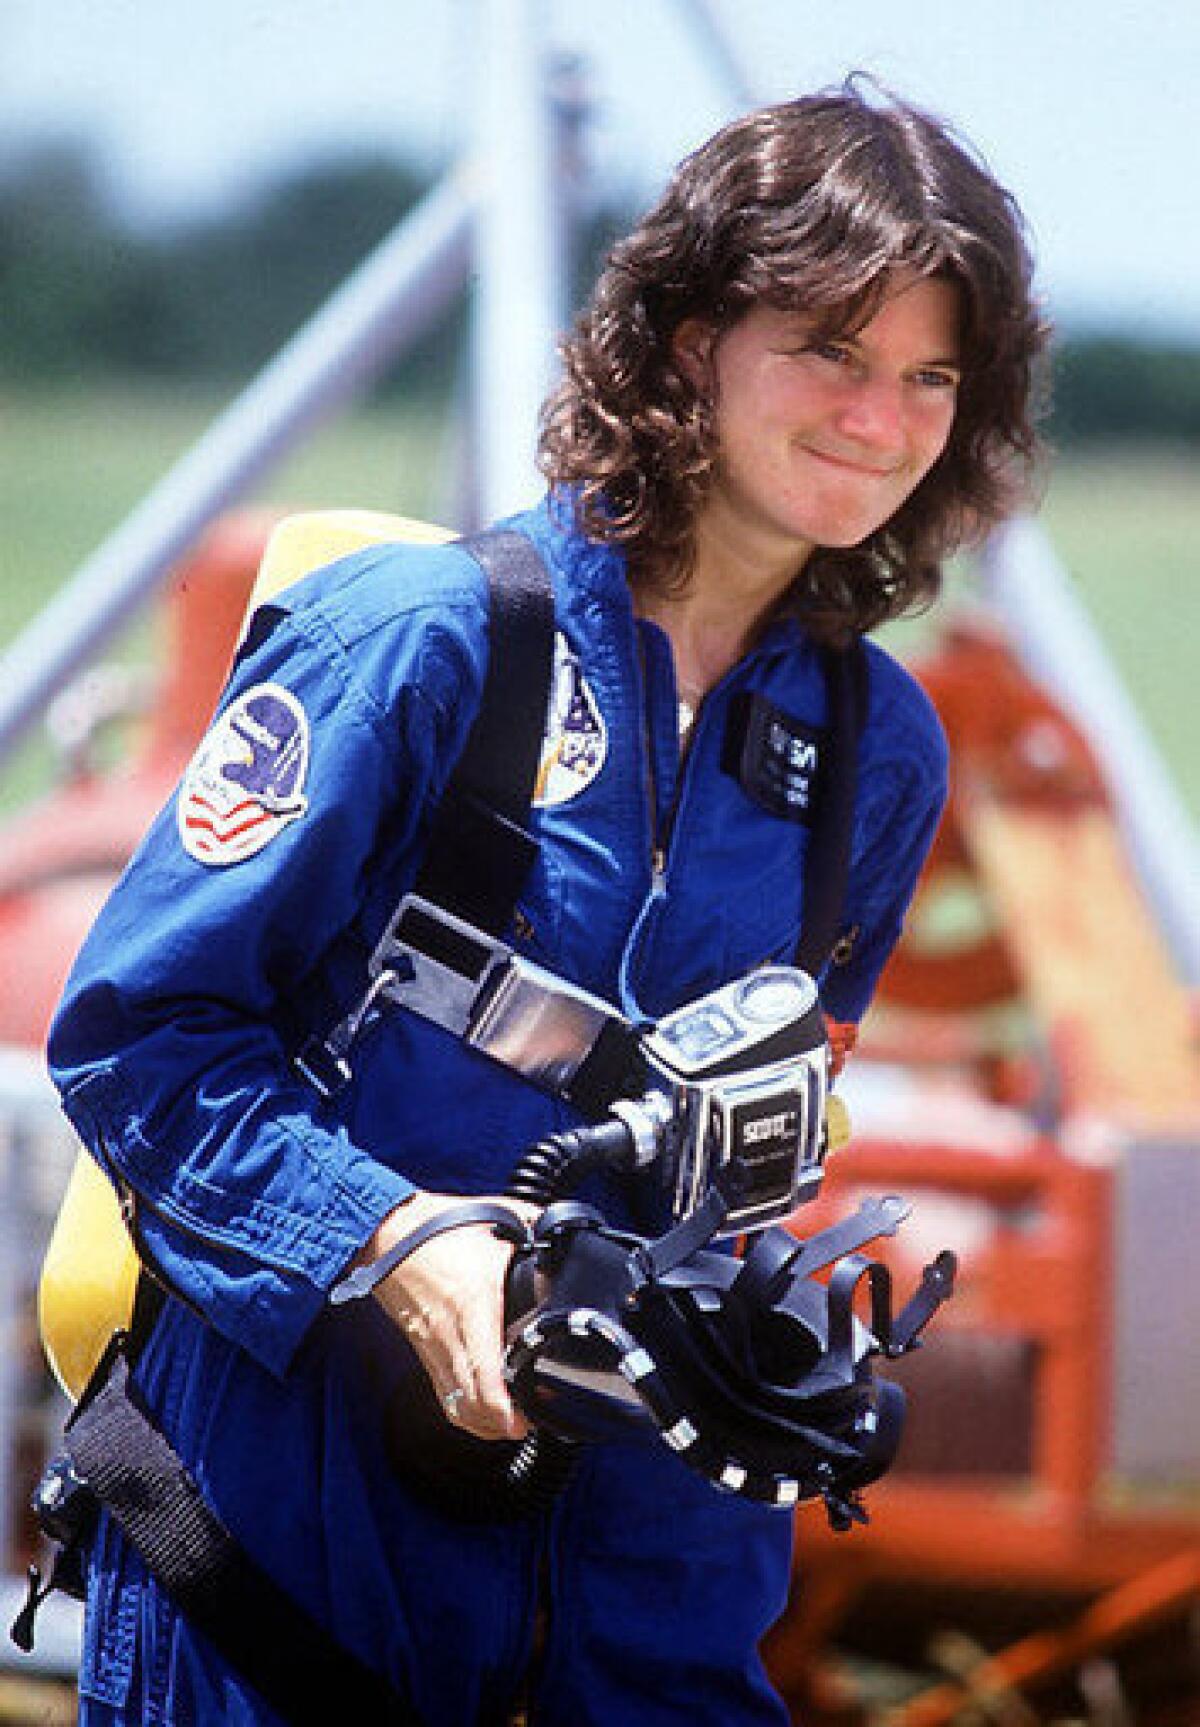 Sally Ride was a role model for women, and she handled the responsibility with grace, friends and colleagues said.